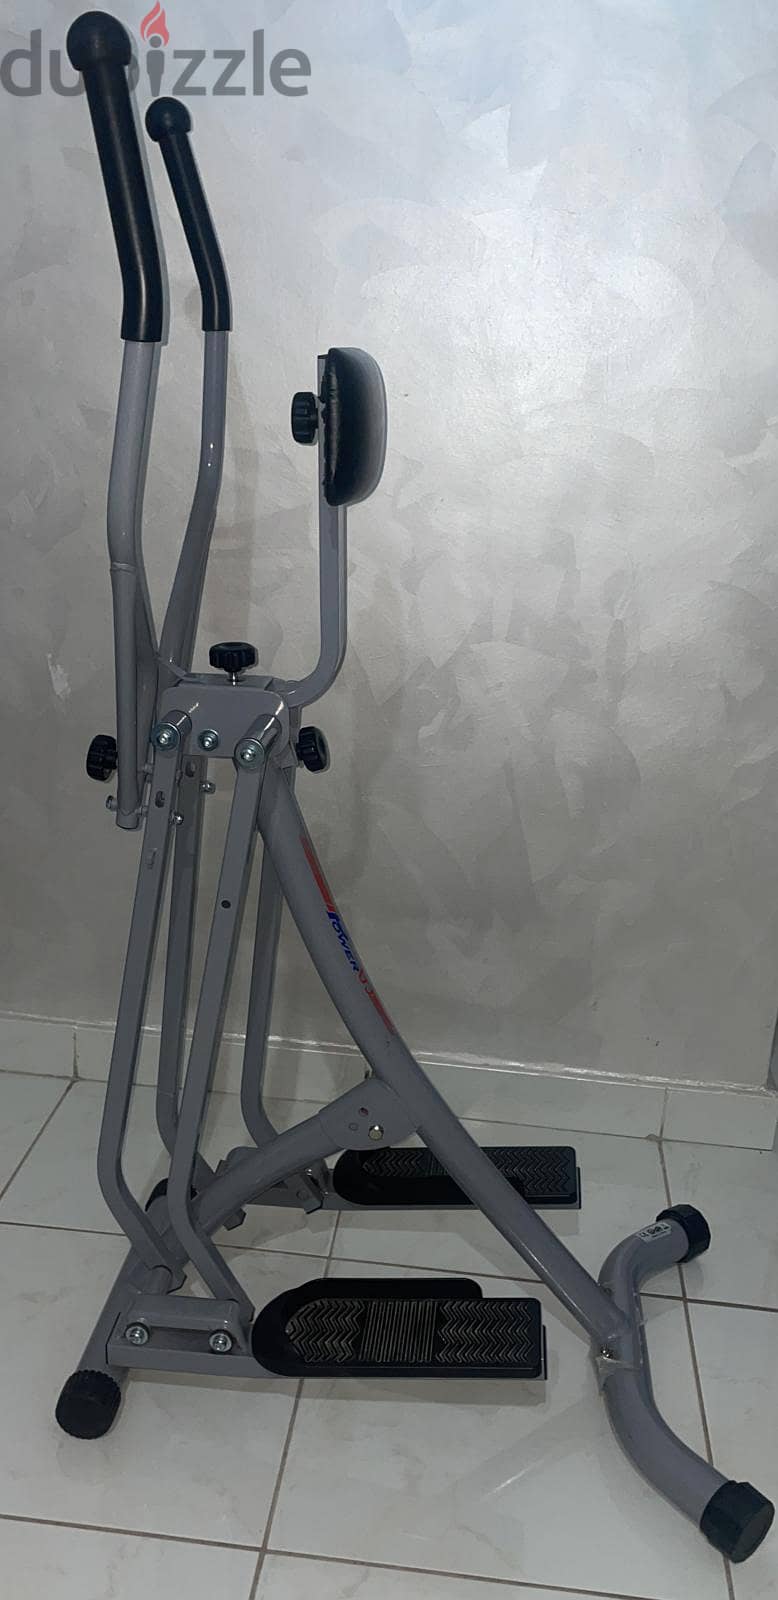 Brand new treadmill and cycling machine for sale in a very discounted 9